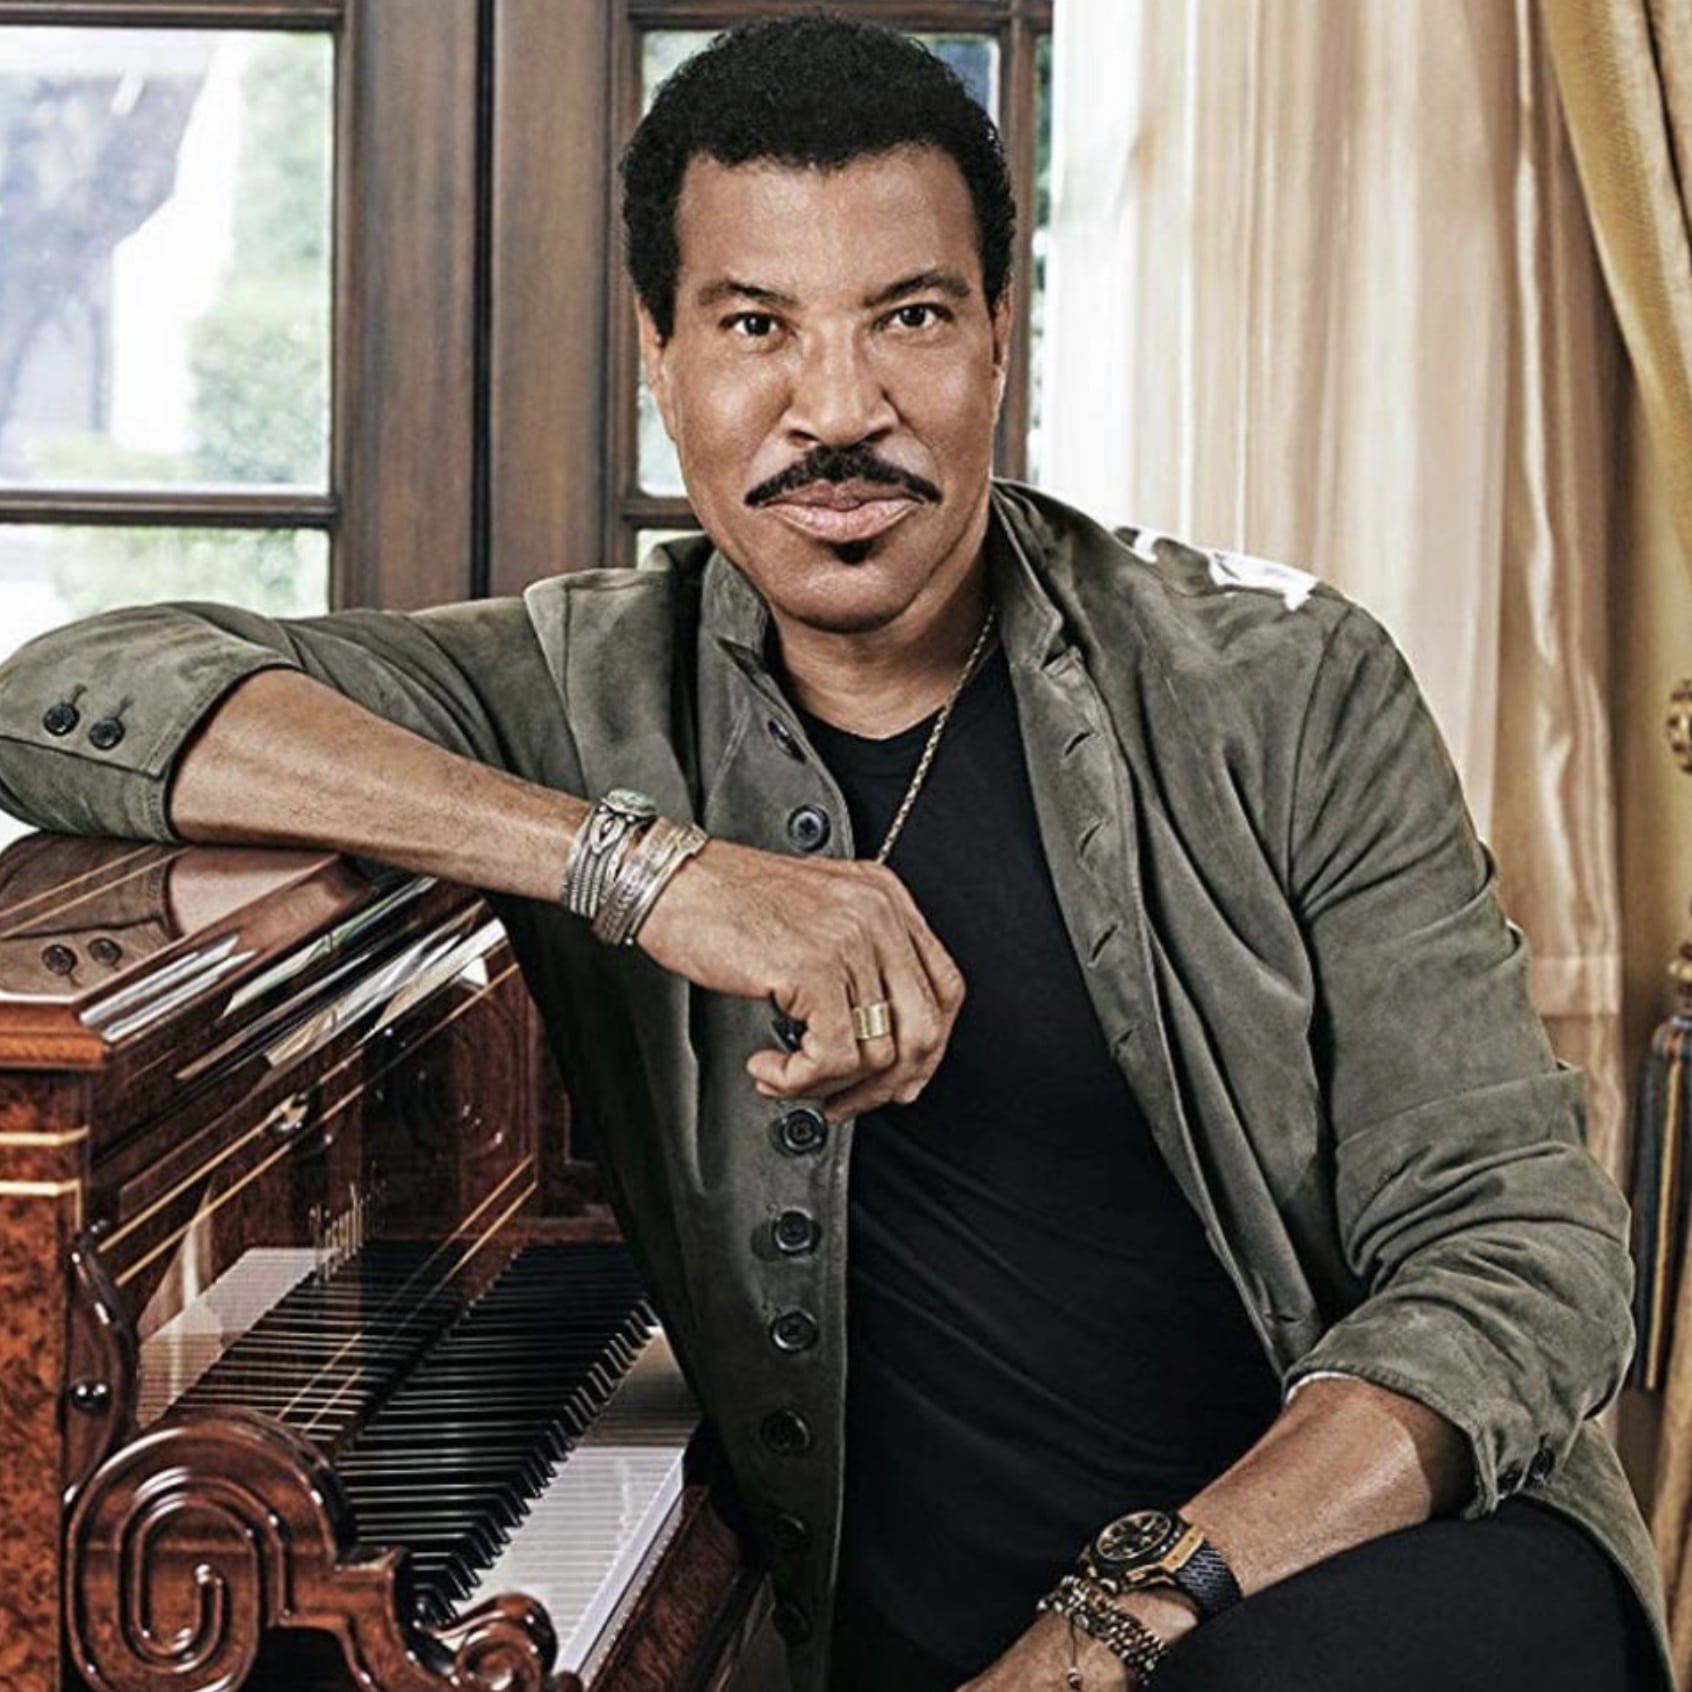 UP CLOSE WITH LIONEL RICHIE ON TRAVELING THE WORLD IN STYLE, AND HIS